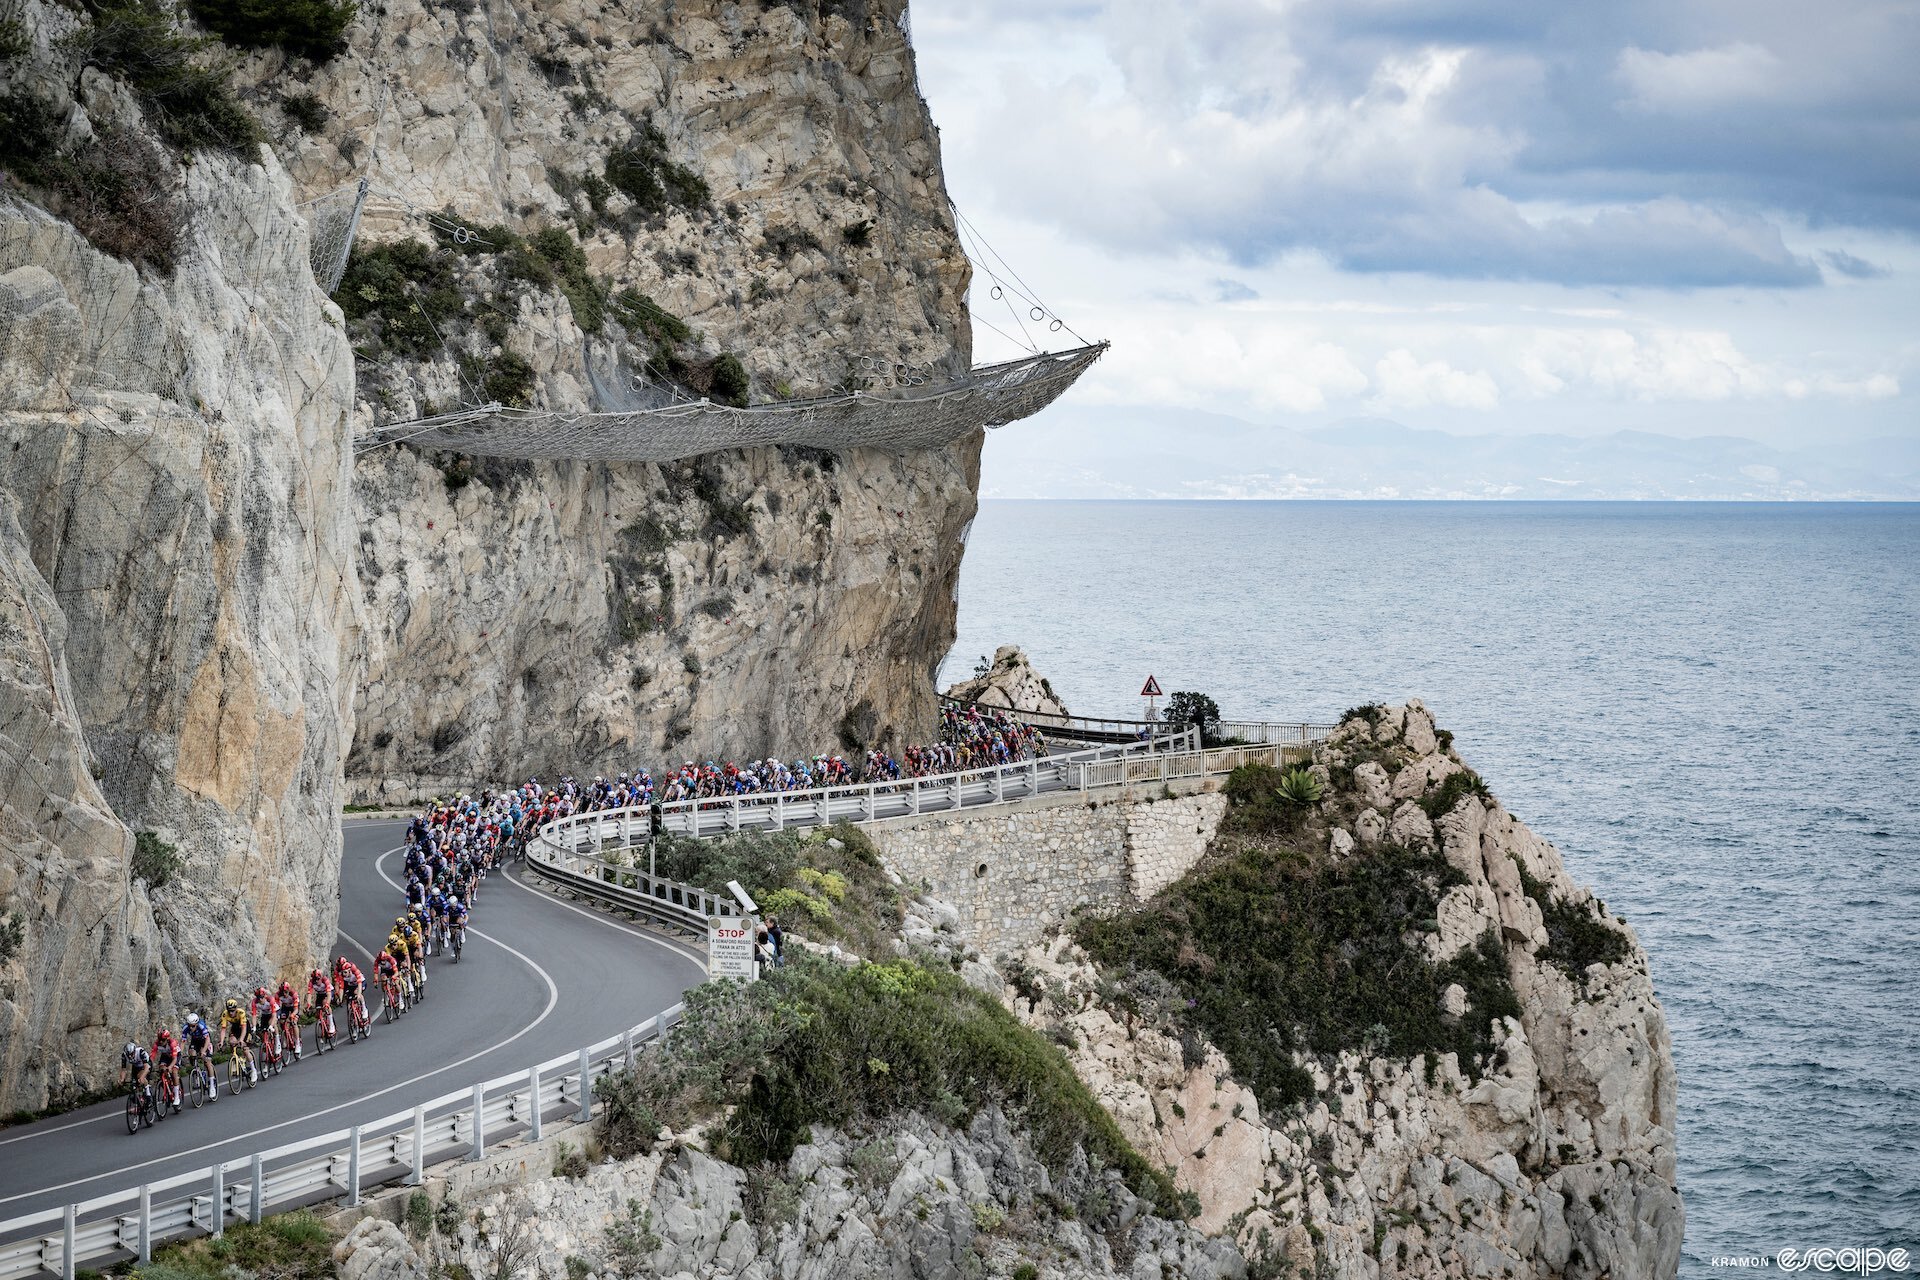 The Milan-San Remo peloton descends to the Mediterranean coast on a winding road, set into a sheer cliffside. Behind, the blue waters stretch out calmly under a partly cloudy sky, while in the distance the curving Italian coastline can just be seen.